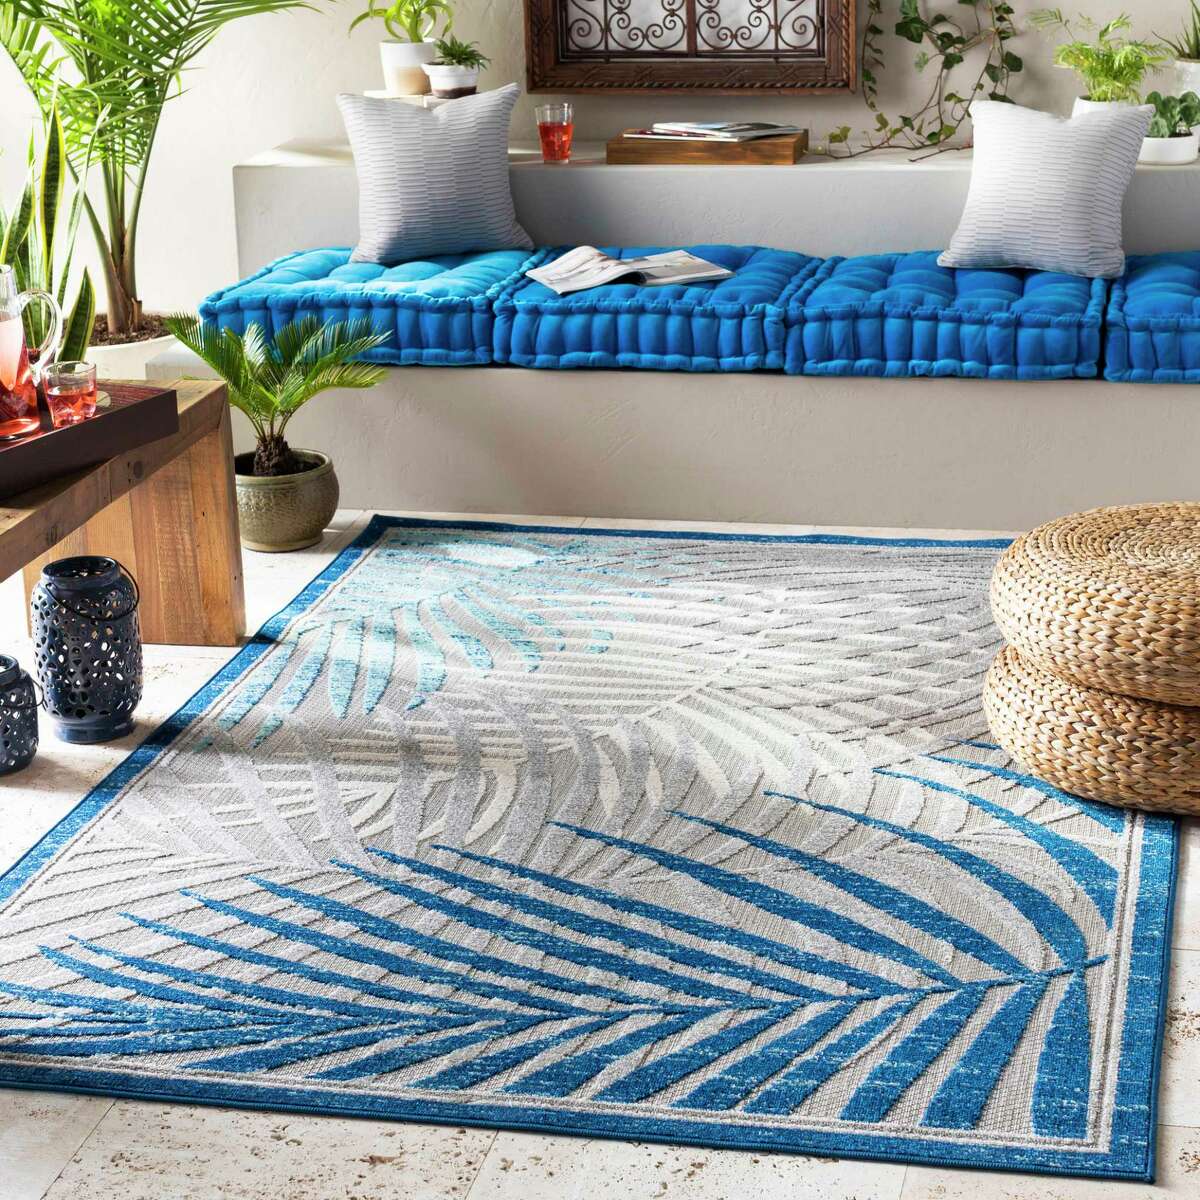 Surya’s Big Sur rug ($160 for a 5’x8’) has a tropical style. It was part of new collections shown at the Fall 2019 High Point Market.